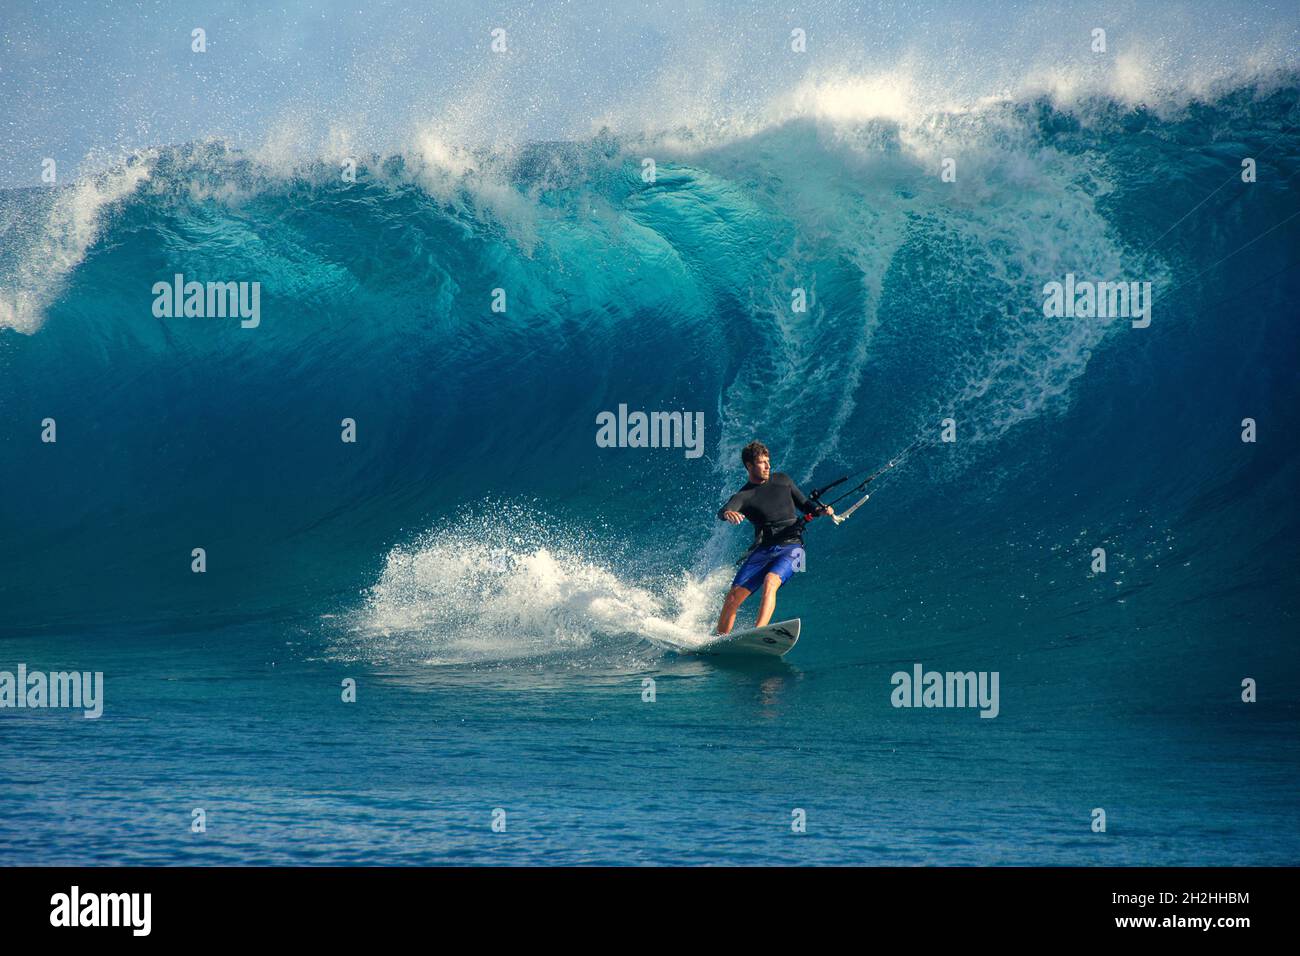 Teahupoʻo, French Polynesia Teahupo'o is scheduled to host the surfing